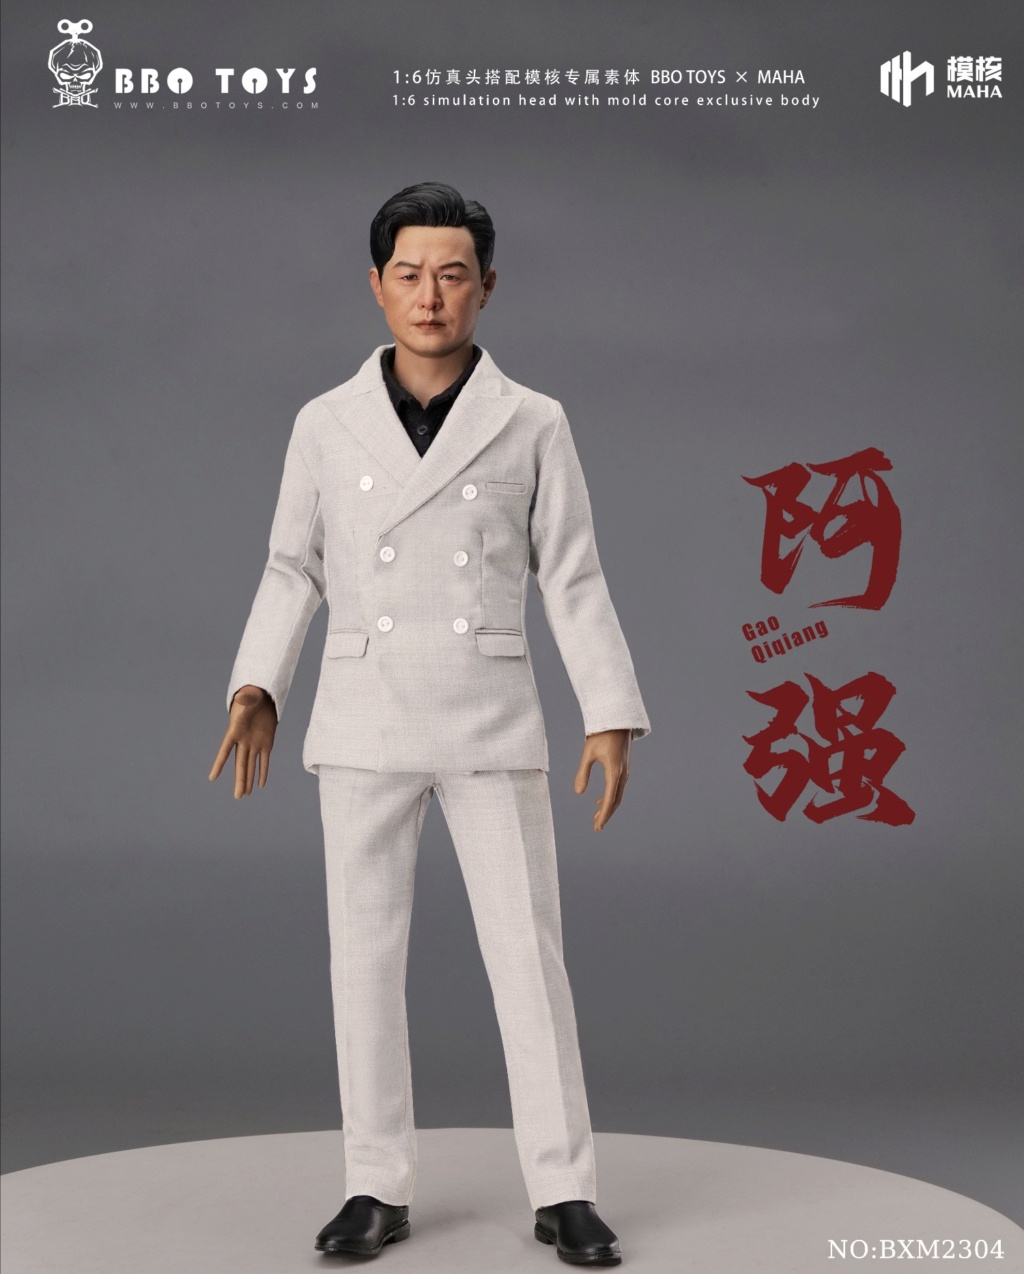 NEW PRODUCT: BBOToys: 1/6 A Qiang 12-inch action figure with suit (new body type) 15304611